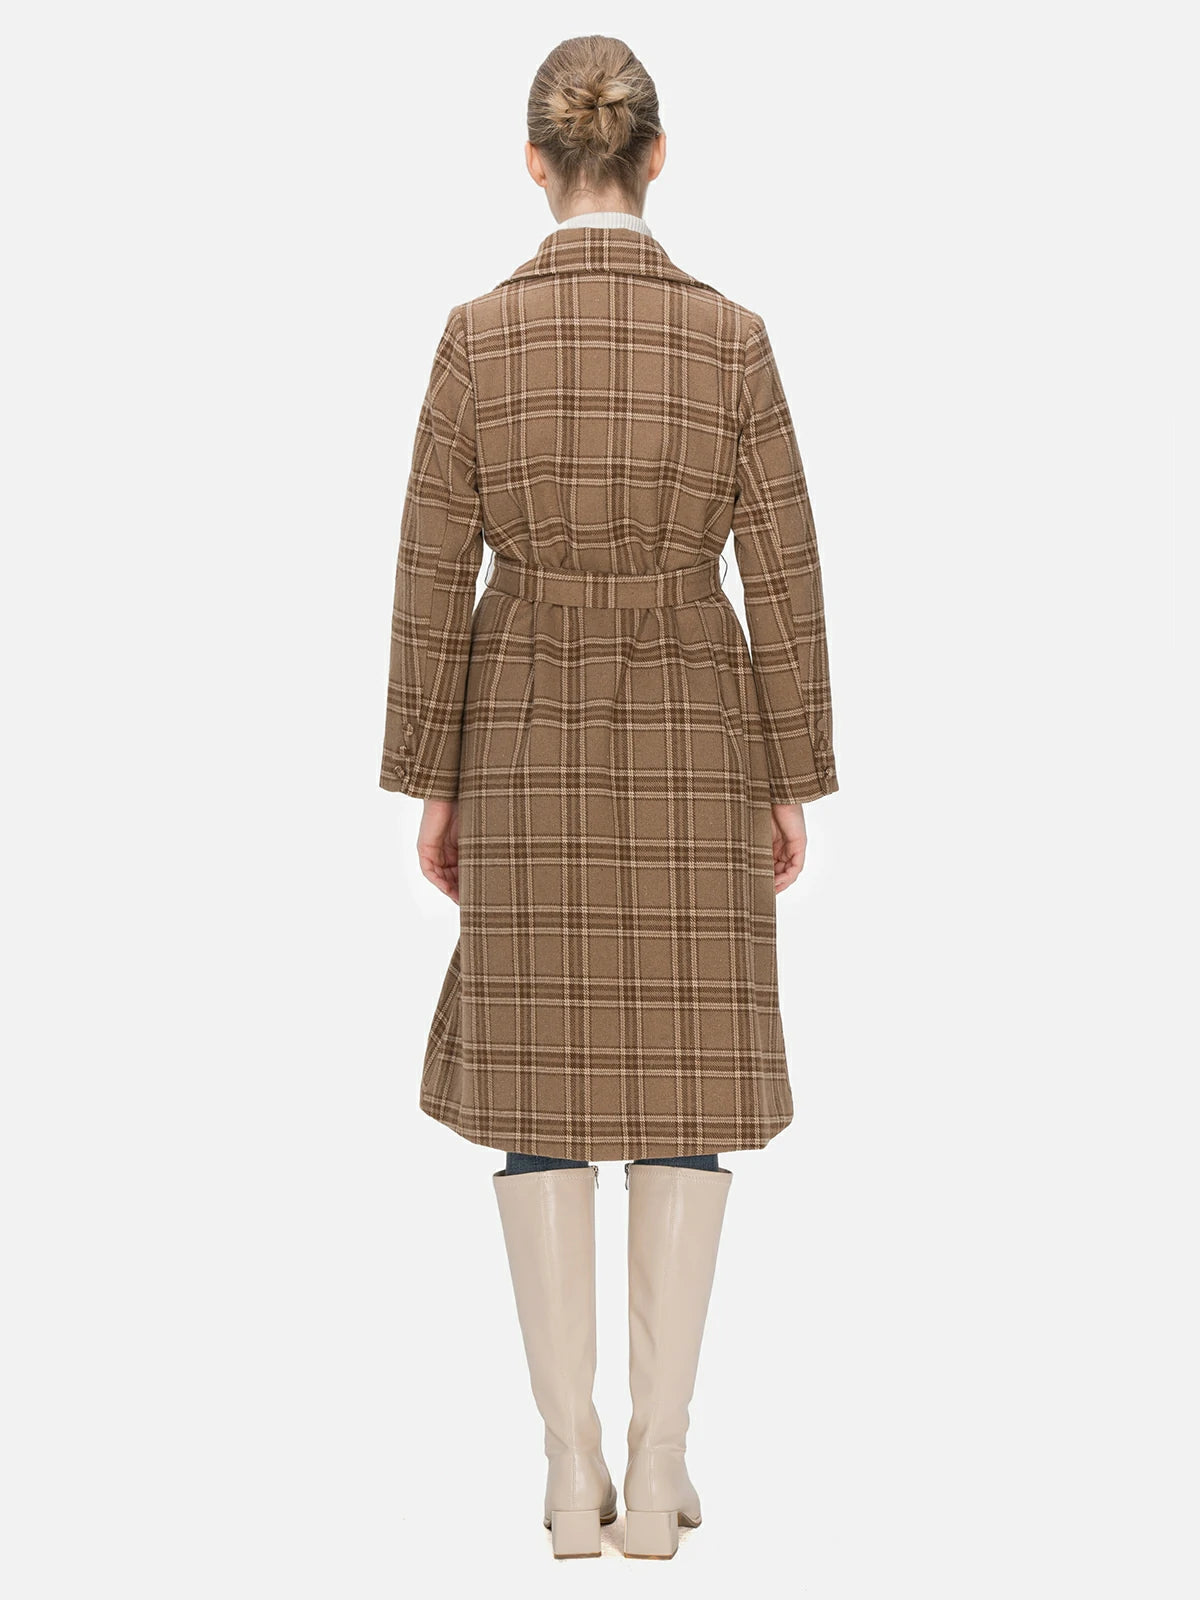 Discover the perfect fit in this brown double-breasted coat, tailored to perfection with a flat lapel, belted design, and checkered pattern, offering a versatile and confidently stylish winter wardrobe addition.